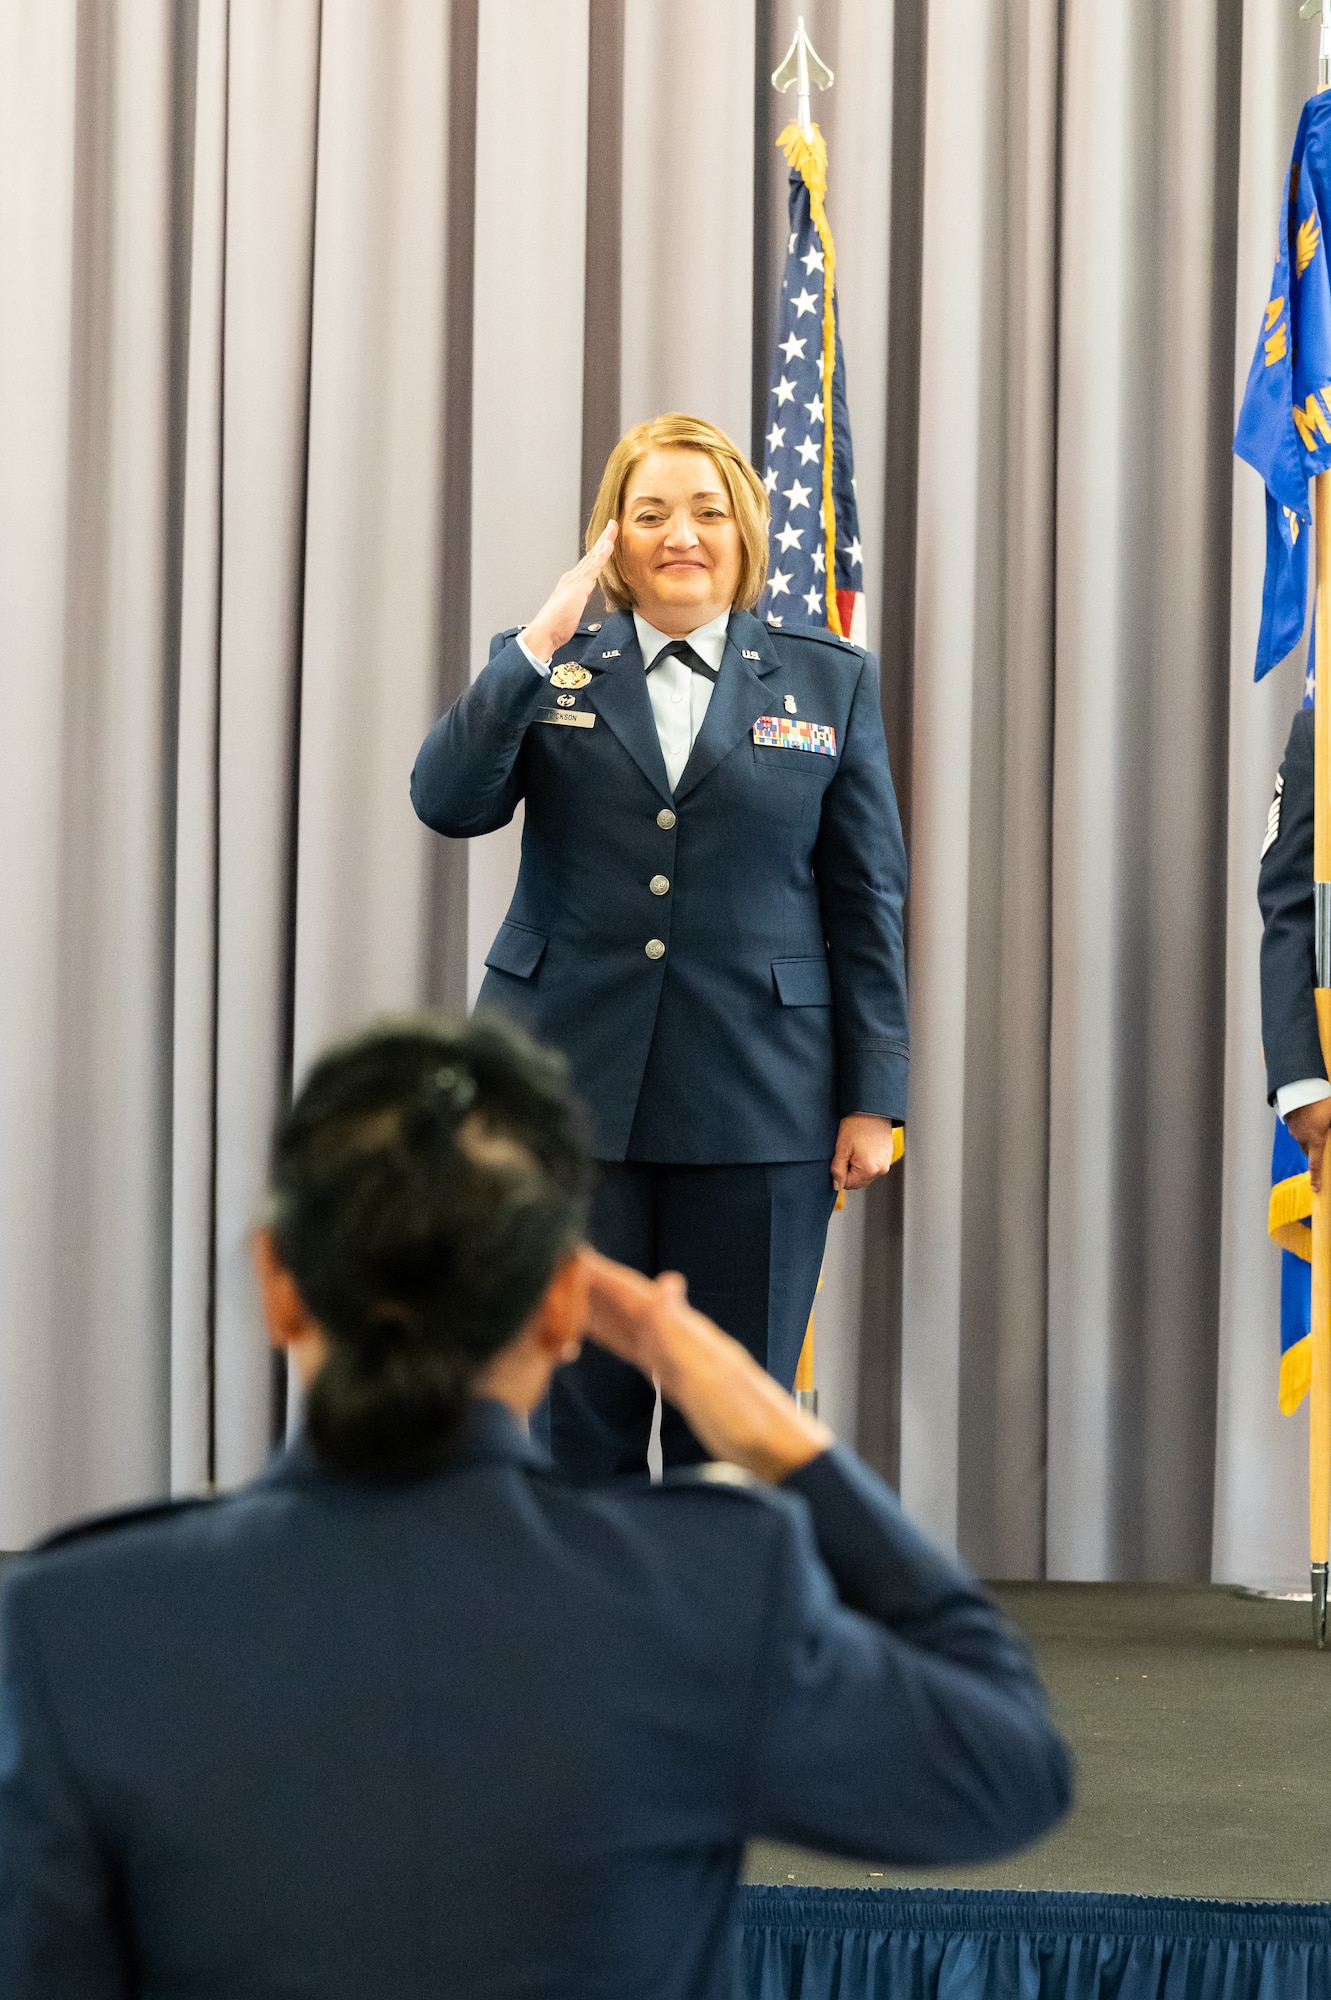 Col. Peggy Dickson, 436th Medical Group commander, receives her first salute from her unit during the 436th MDG change of command ceremony at Dover Air Force Base, Delaware, June 9, 2022. Dickson was previously the commander of the 10th Dental Squadron at the U.S. Air Force Academy in Colorado. (U.S. Air Force photo by Mauricio Campino)